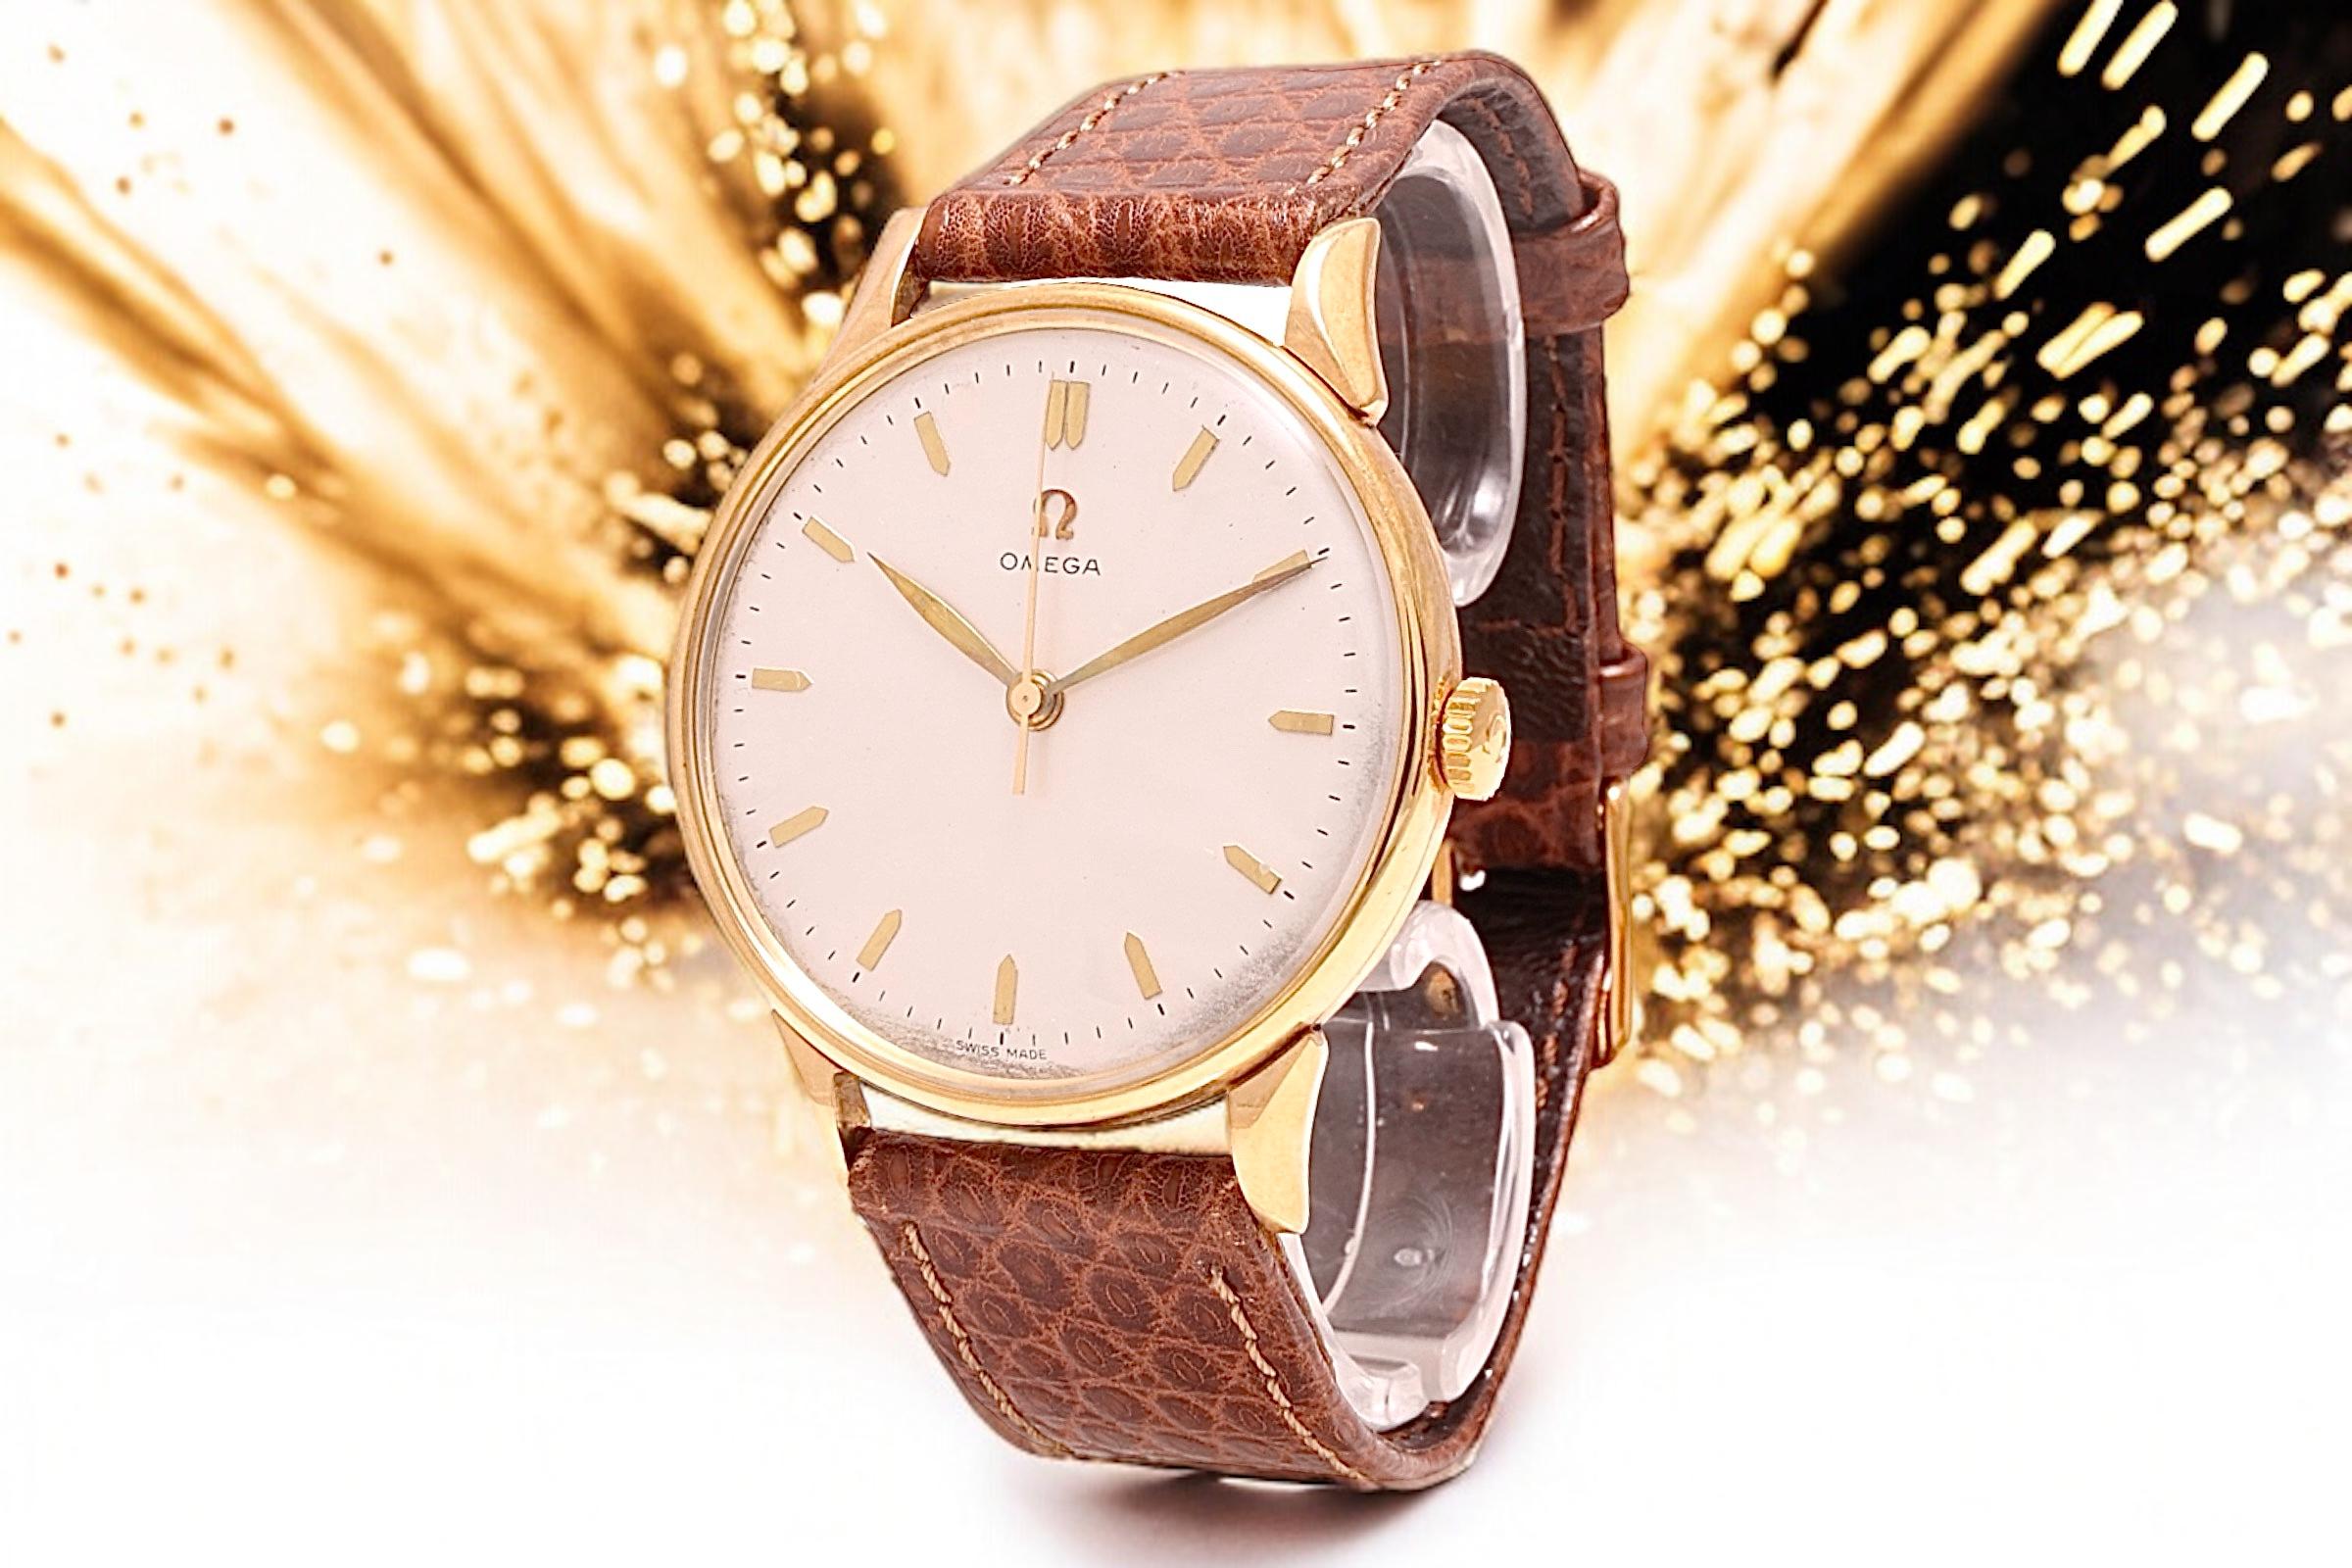 14 Kt Solid Yellow Gold Omega Jumbo, Cal 30 T2 SCPC Collectors Wrist Watch For Sale 8